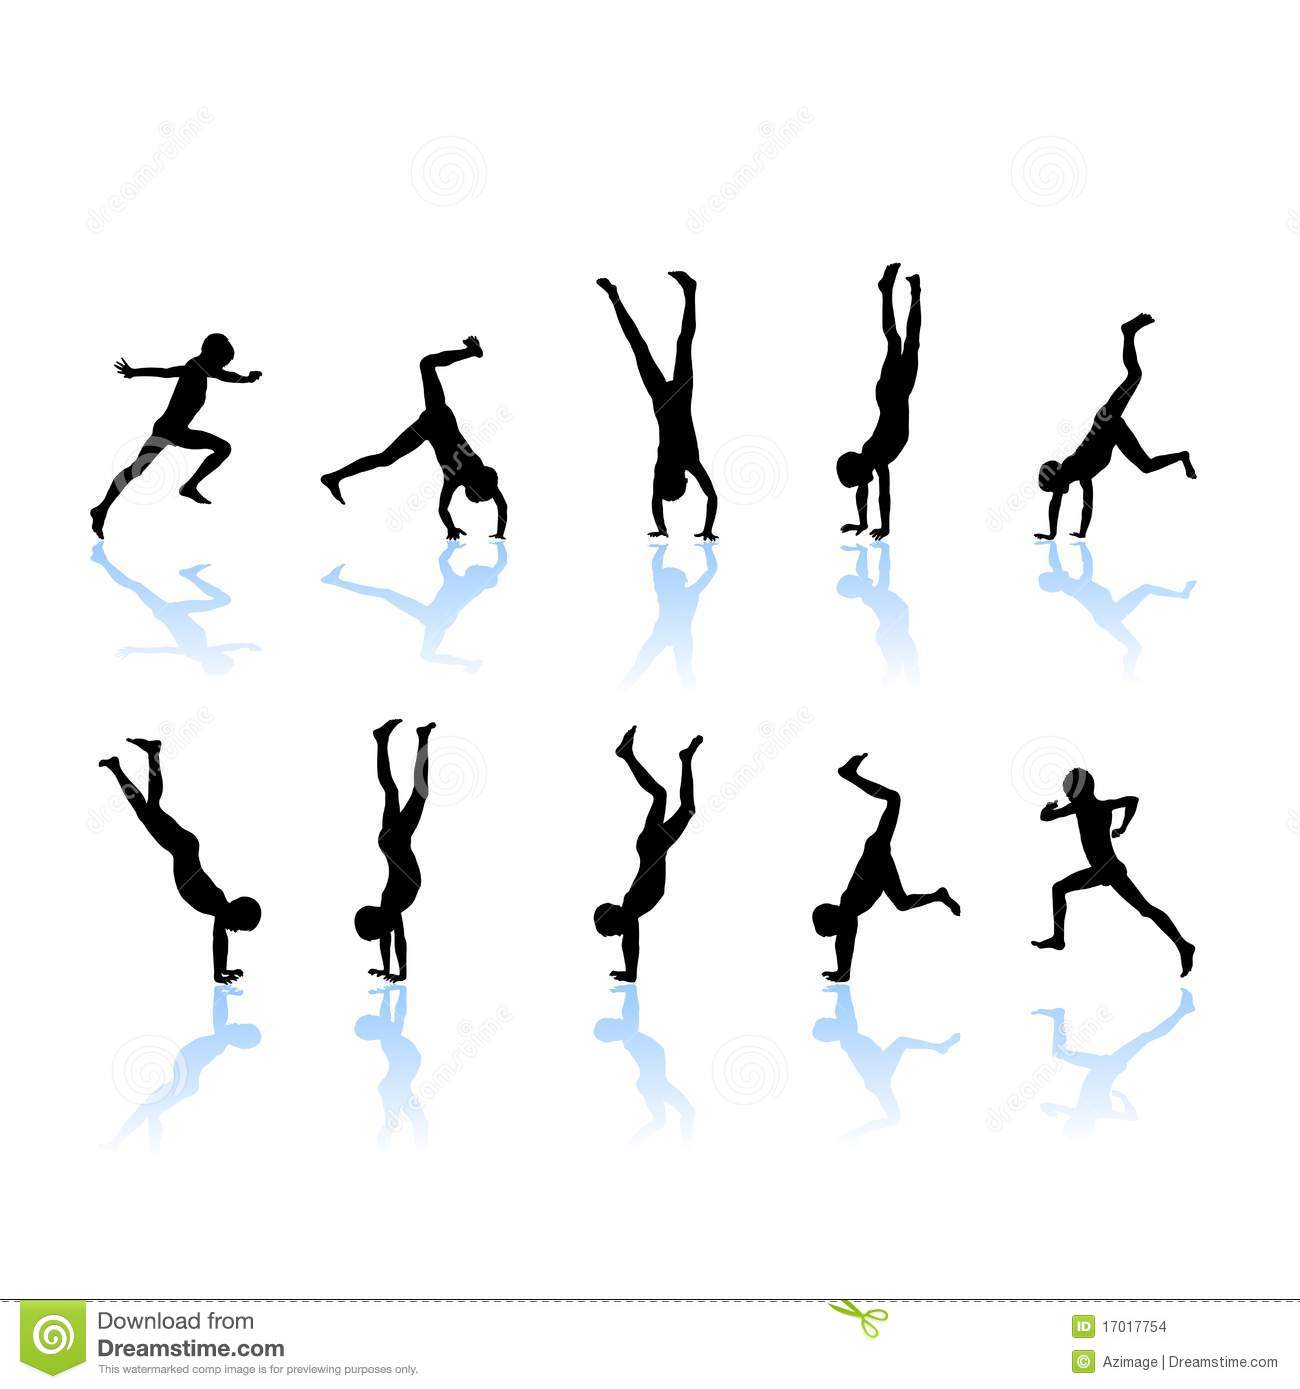 The Boy Somersault Jump There Is On Hands Silhouette Illustration